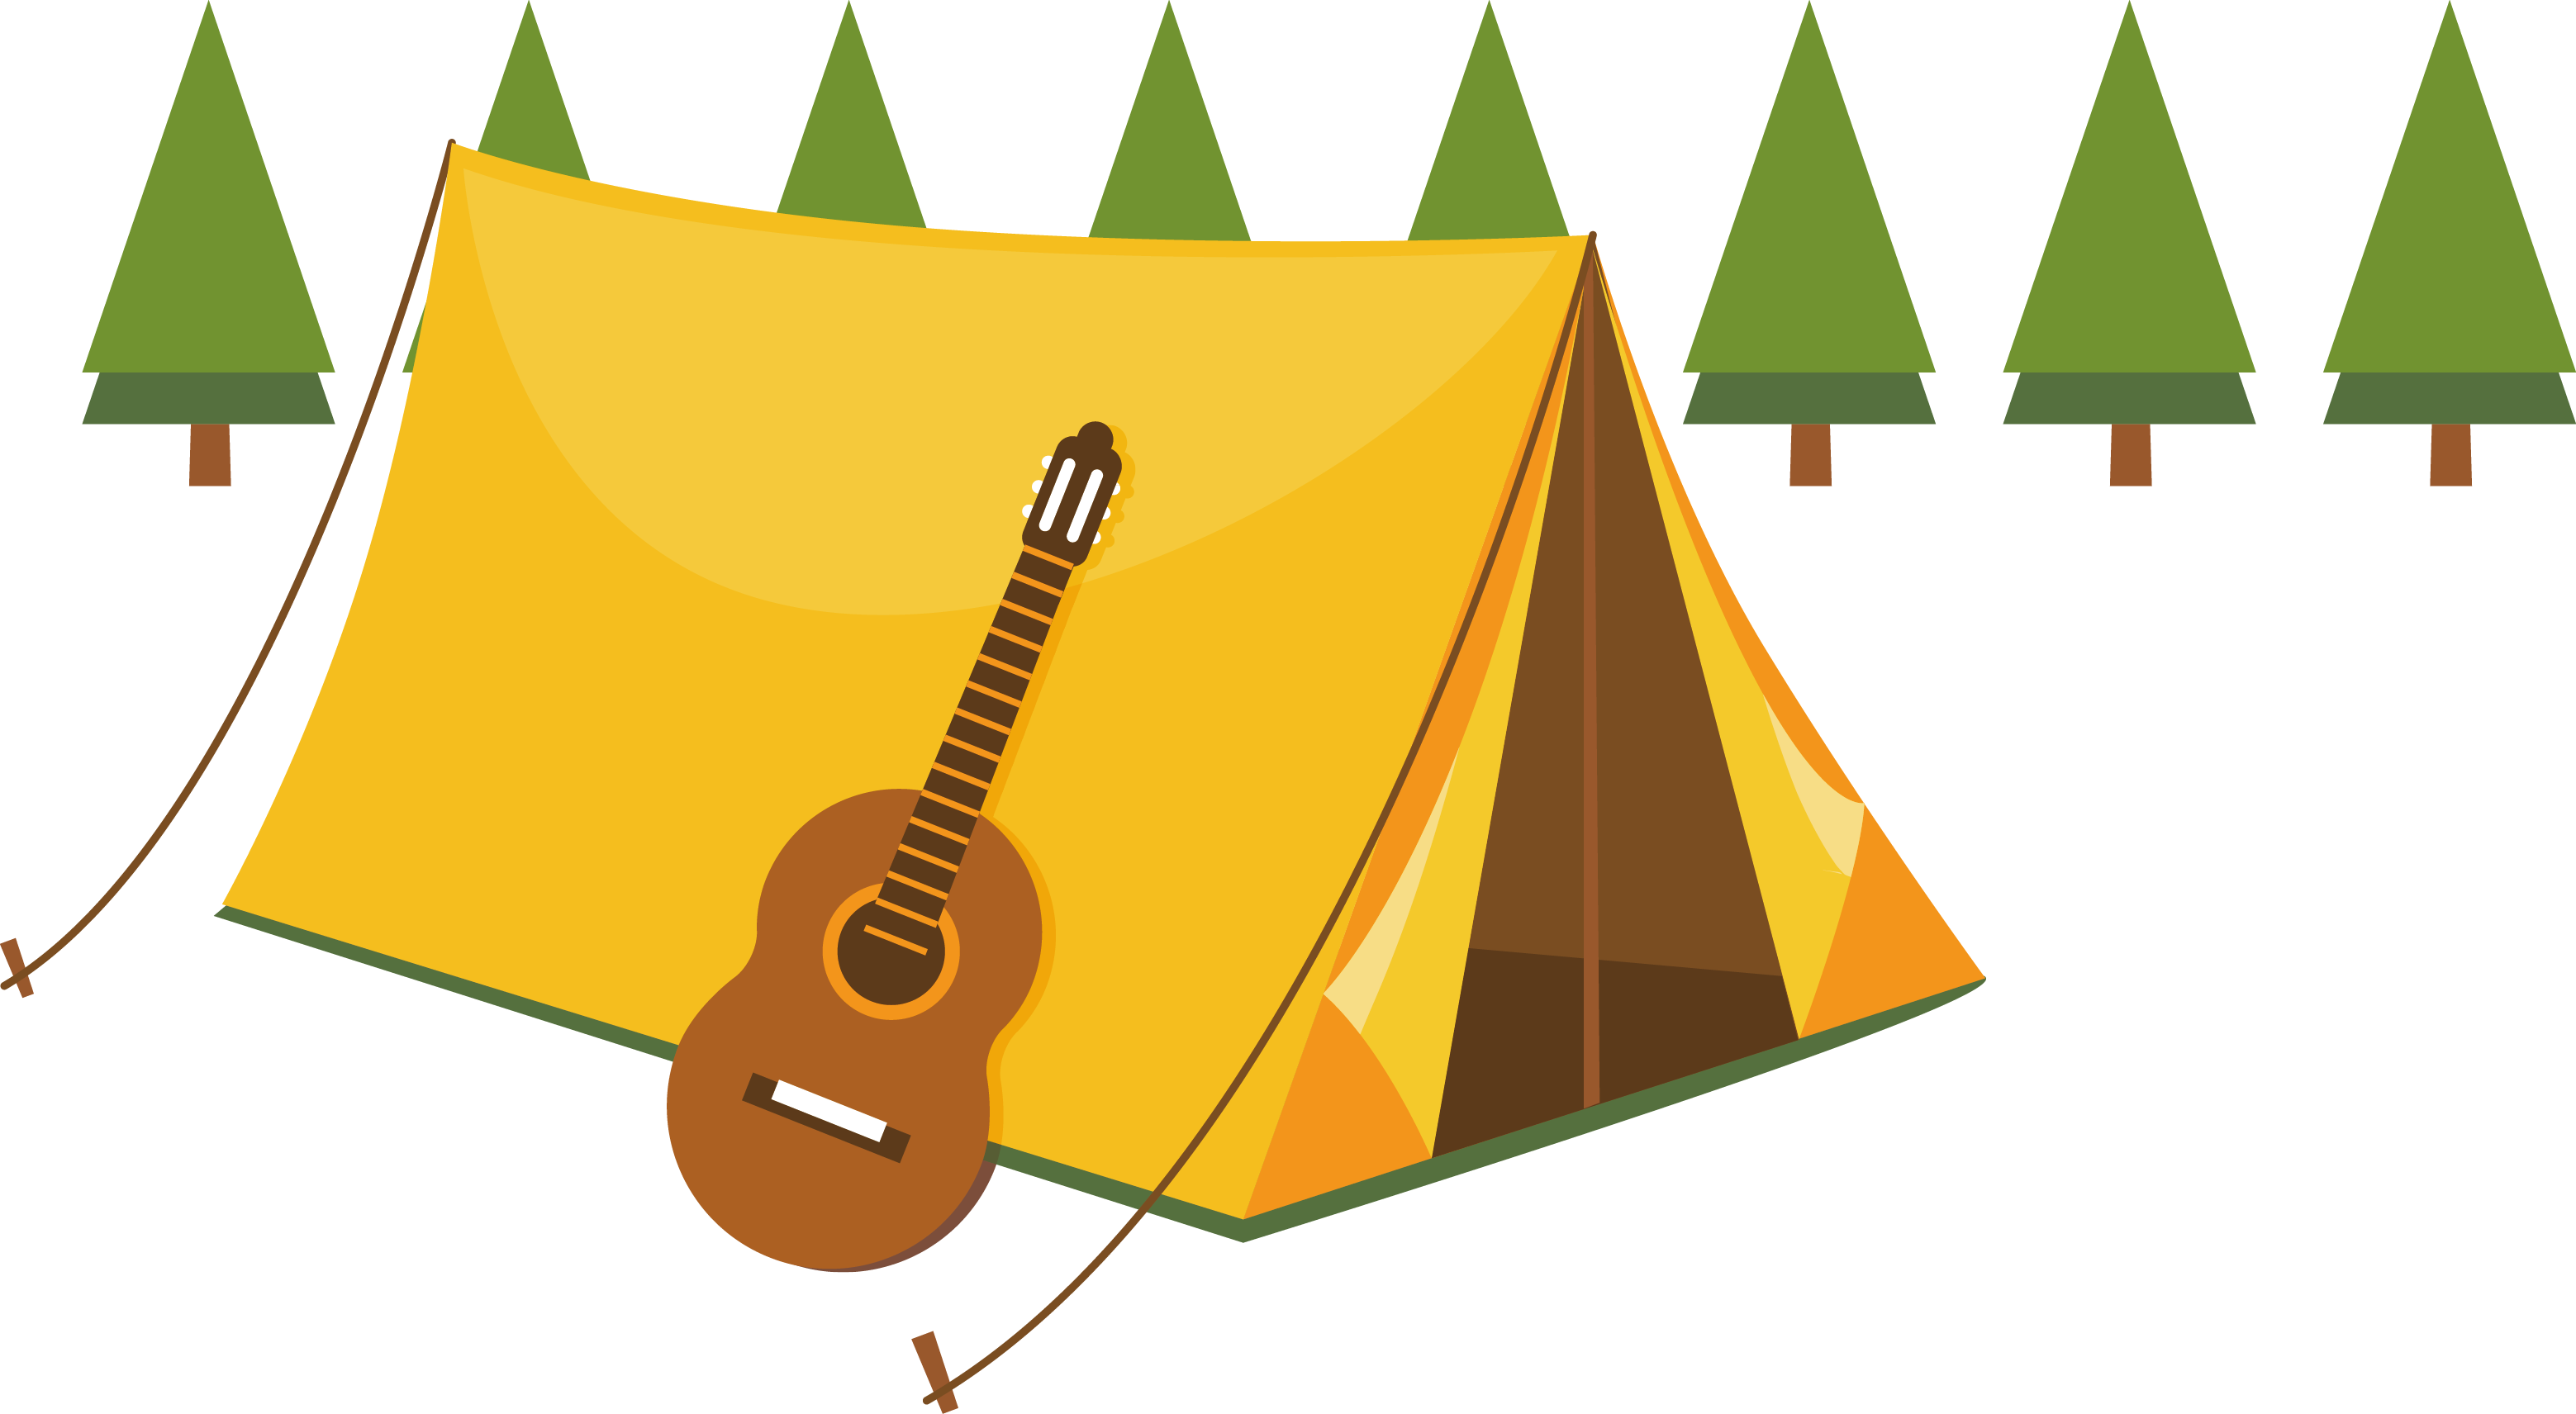 Download and share clipart about Camping Summer Camp Tent Illustration - Su...